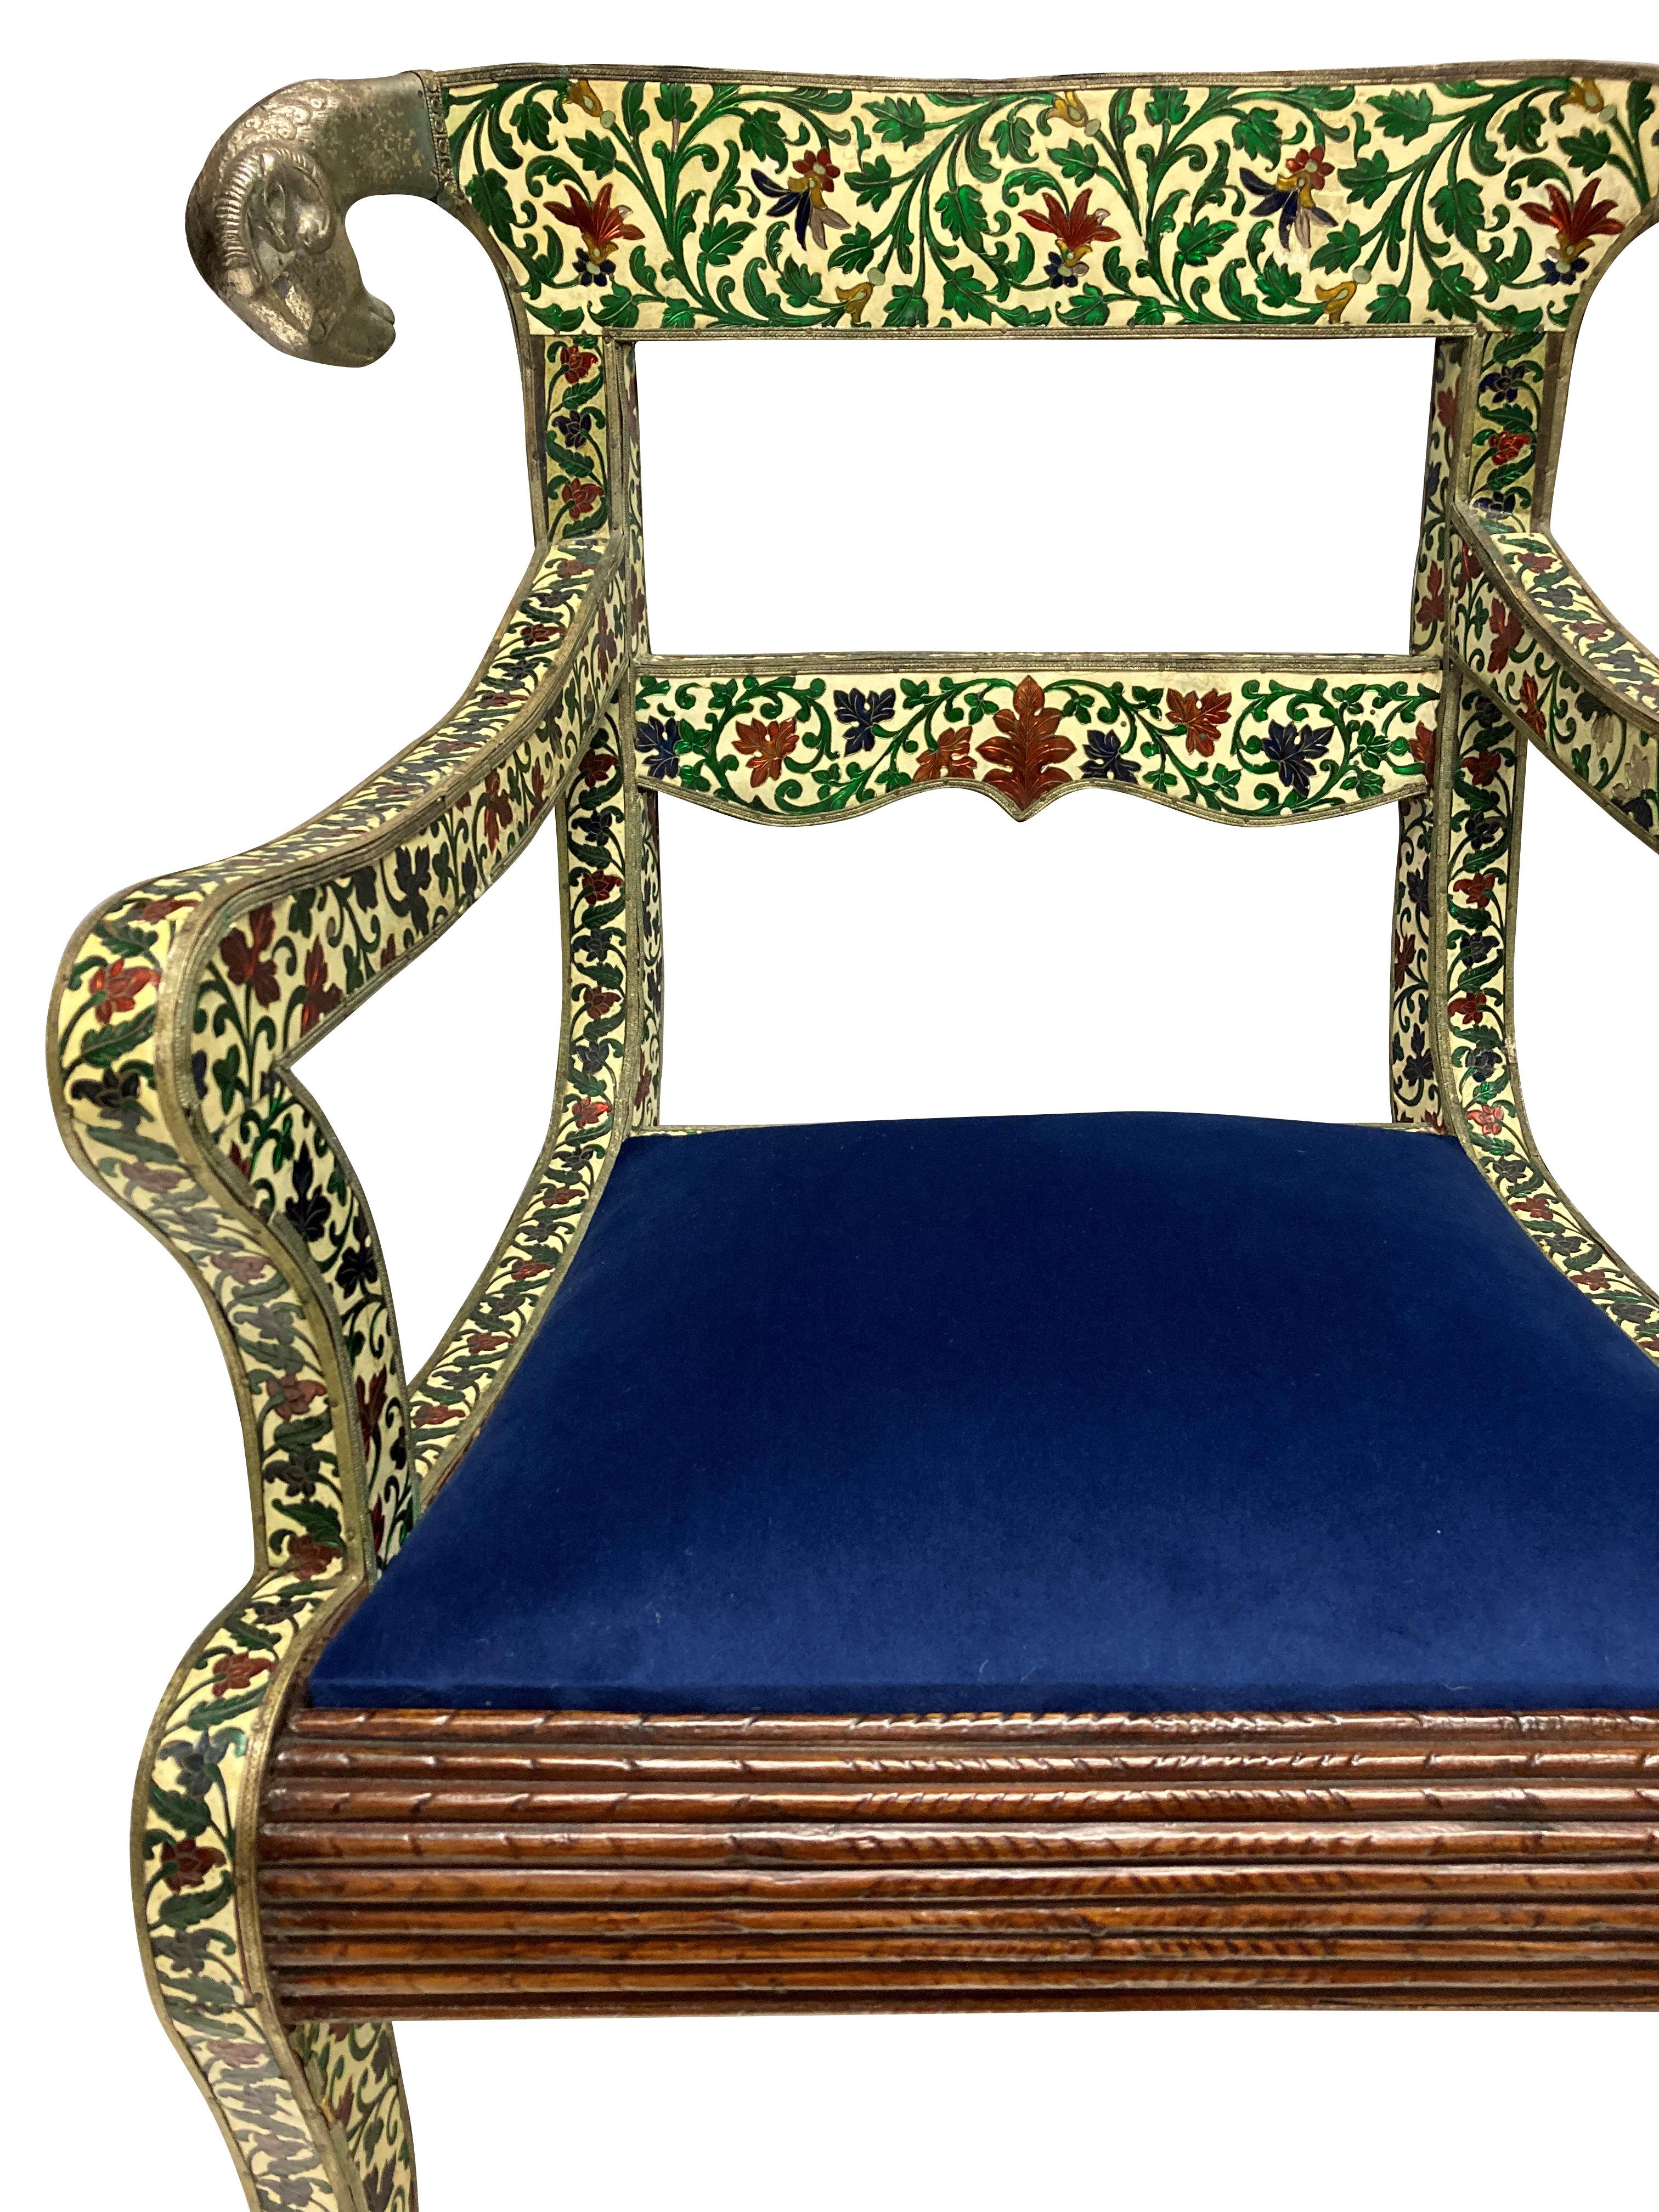 A rare pair of Indian cloisonne and silver armchairs in the Regency manner. In hardwood and covered in beautifully decorated enamel depicting flowers and foliage, with repousse silver decoration. The original drop in seats were in Imperial purple